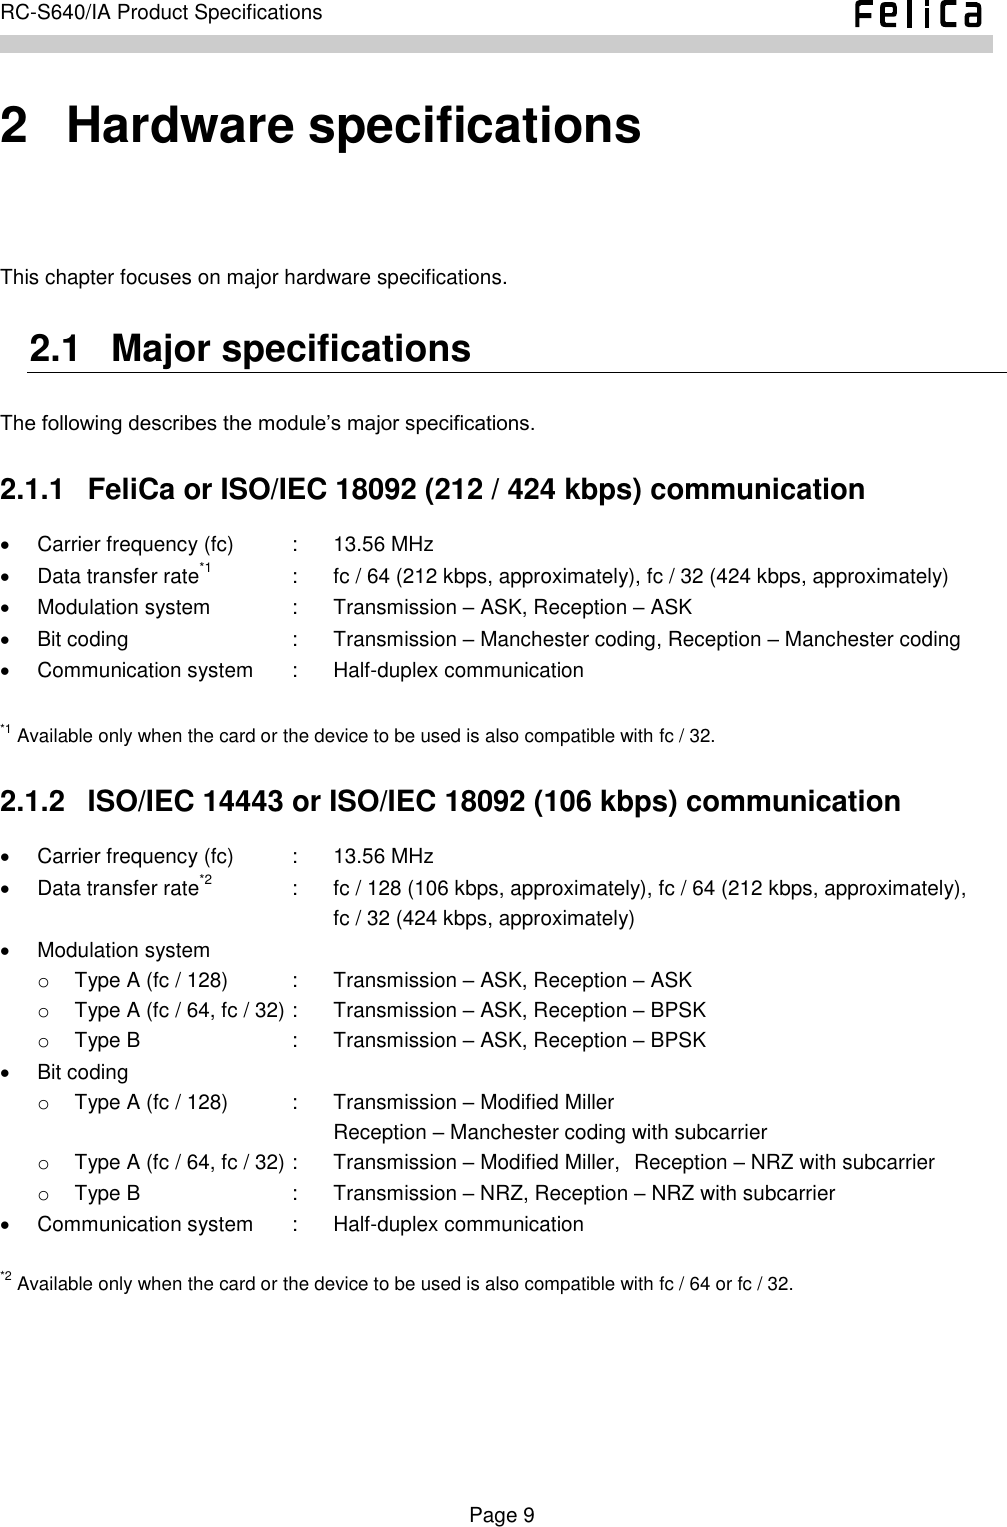    Page 9     RC-S640/IA Product Specifications    2   Hardware specifications This chapter focuses on major hardware specifications. 2.1   Major specifications The following describes the module’s major specifications. 2.1.1   FeliCa or ISO/IEC 18092 (212 / 424 kbps) communication   Carrier frequency (fc)  :  13.56 MHz   Data transfer rate*1  :  fc / 64 (212 kbps, approximately), fc / 32 (424 kbps, approximately)   Modulation system  :  Transmission – ASK, Reception – ASK   Bit coding  :  Transmission – Manchester coding, Reception – Manchester coding   Communication system  :  Half-duplex communication  *1 Available only when the card or the device to be used is also compatible with fc / 32. 2.1.2   ISO/IEC 14443 or ISO/IEC 18092 (106 kbps) communication   Carrier frequency (fc)  :  13.56 MHz   Data transfer rate*2  :  fc / 128 (106 kbps, approximately), fc / 64 (212 kbps, approximately),       fc / 32 (424 kbps, approximately)   Modulation system o  Type A (fc / 128)  :  Transmission – ASK, Reception – ASK o  Type A (fc / 64, fc / 32) :  Transmission – ASK, Reception – BPSK o  Type B  :  Transmission – ASK, Reception – BPSK   Bit coding o  Type A (fc / 128)  :  Transmission – Modified Miller      Reception – Manchester coding with subcarrier o  Type A (fc / 64, fc / 32) :  Transmission – Modified Miller,  Reception – NRZ with subcarrier o  Type B  :  Transmission – NRZ, Reception – NRZ with subcarrier   Communication system  :  Half-duplex communication  *2 Available only when the card or the device to be used is also compatible with fc / 64 or fc / 32.    